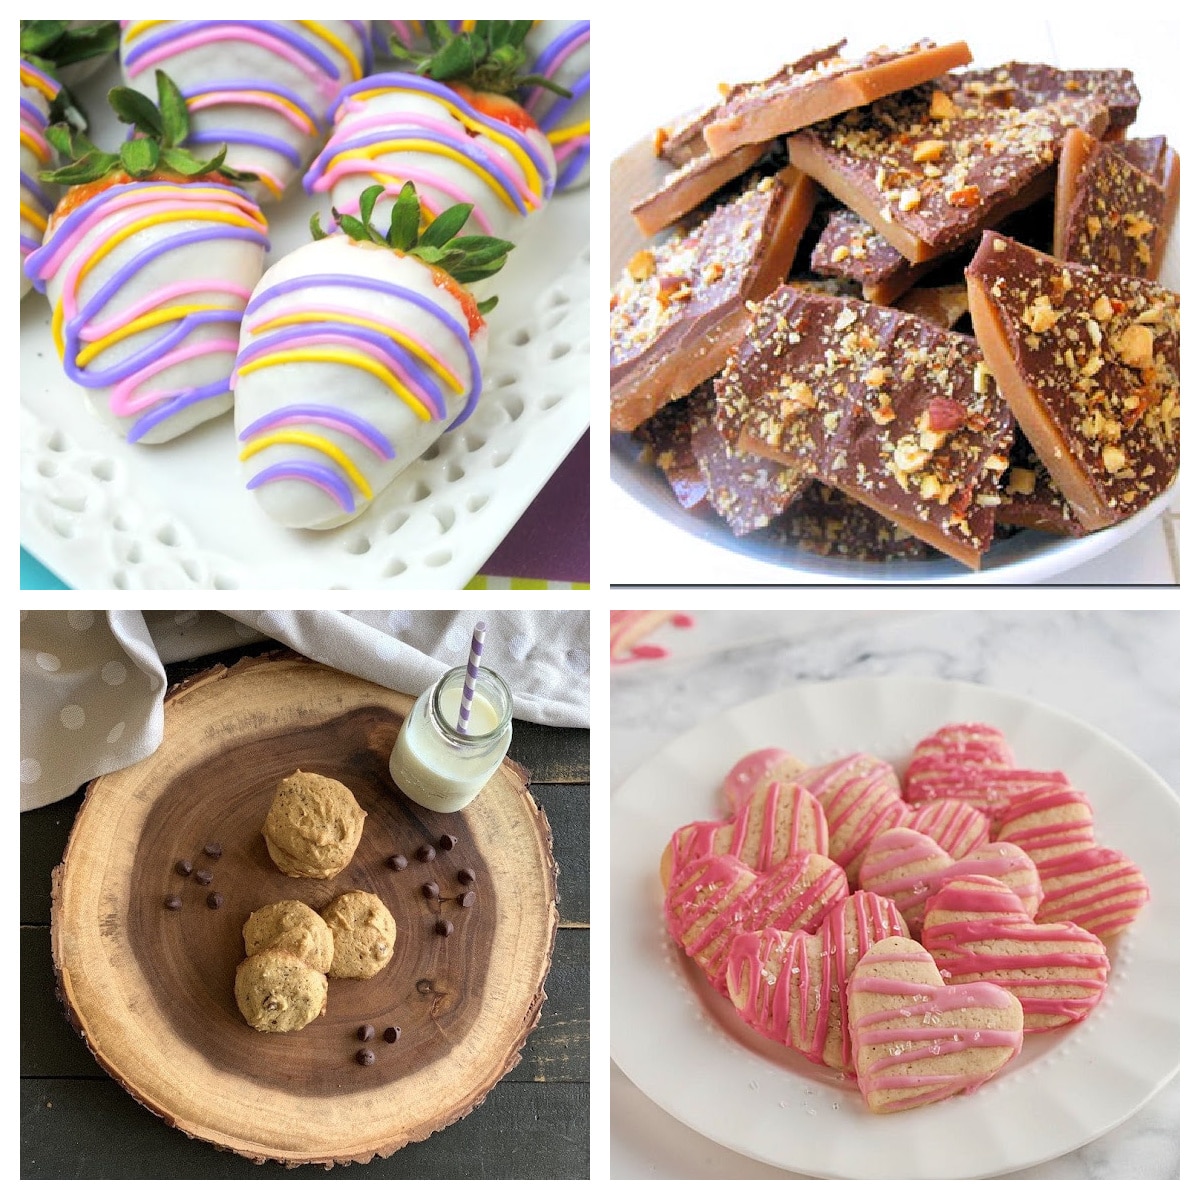 Weight Watchers Sweets for Valentine’s Day